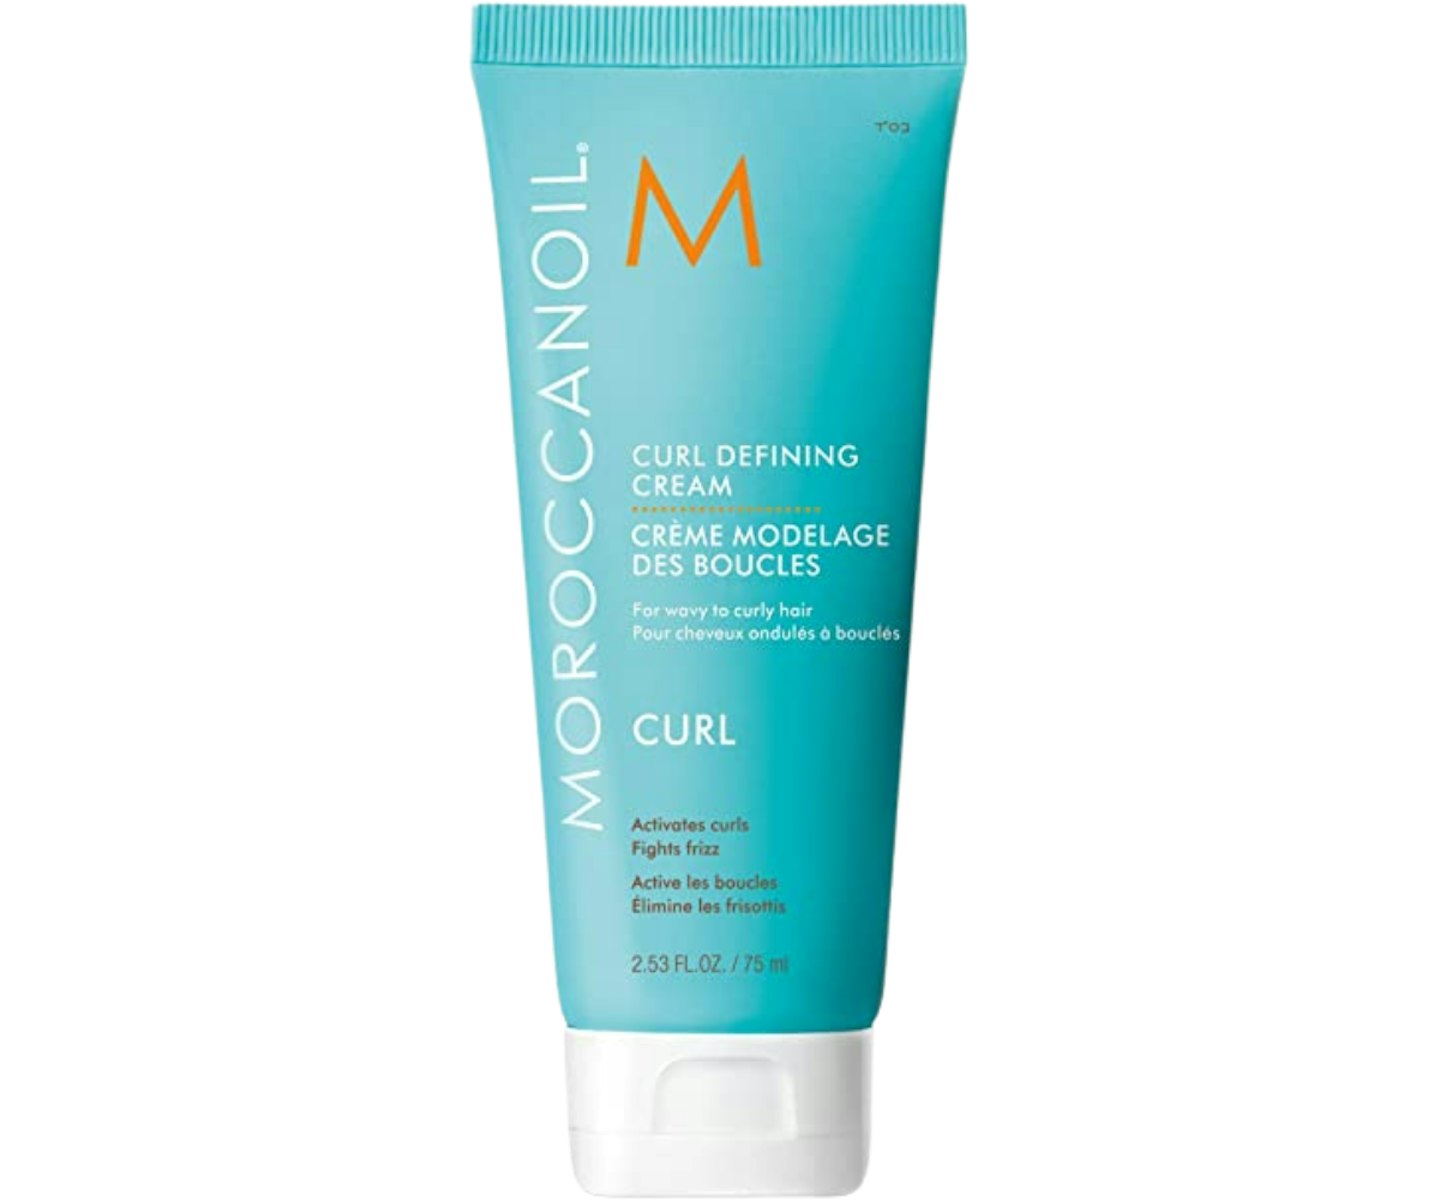 A picture of the Moroccanoil Curl Defining Cream